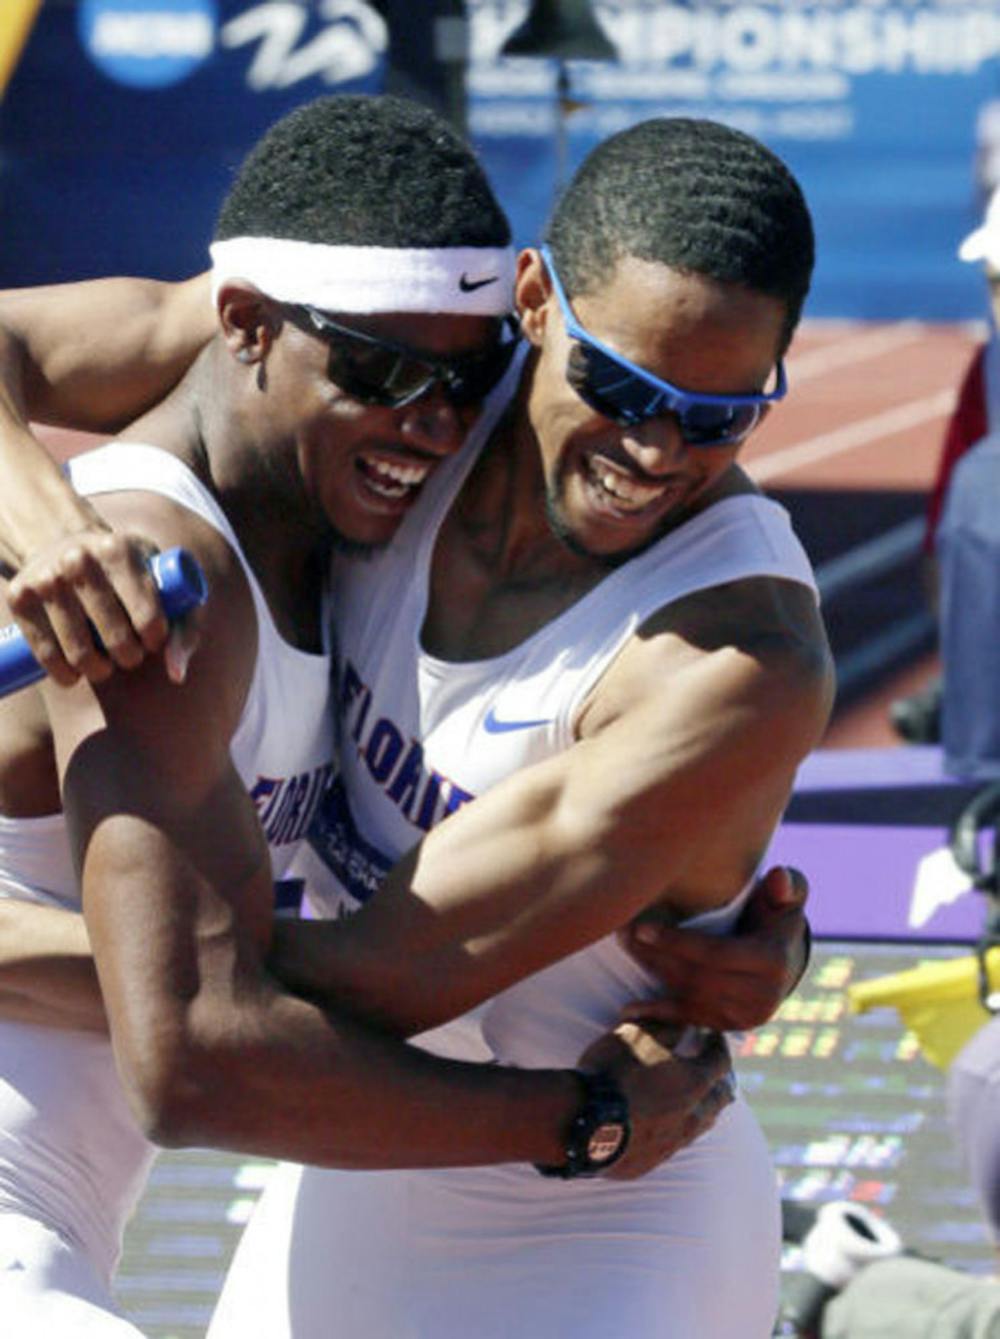 <p>Hugh Graham Jr. (left) hugs Arman Hall after winning the 4x400m relay during the NCAA Outdoor Championships in Eugene, Ore., on Jun. 8, 2013.</p>